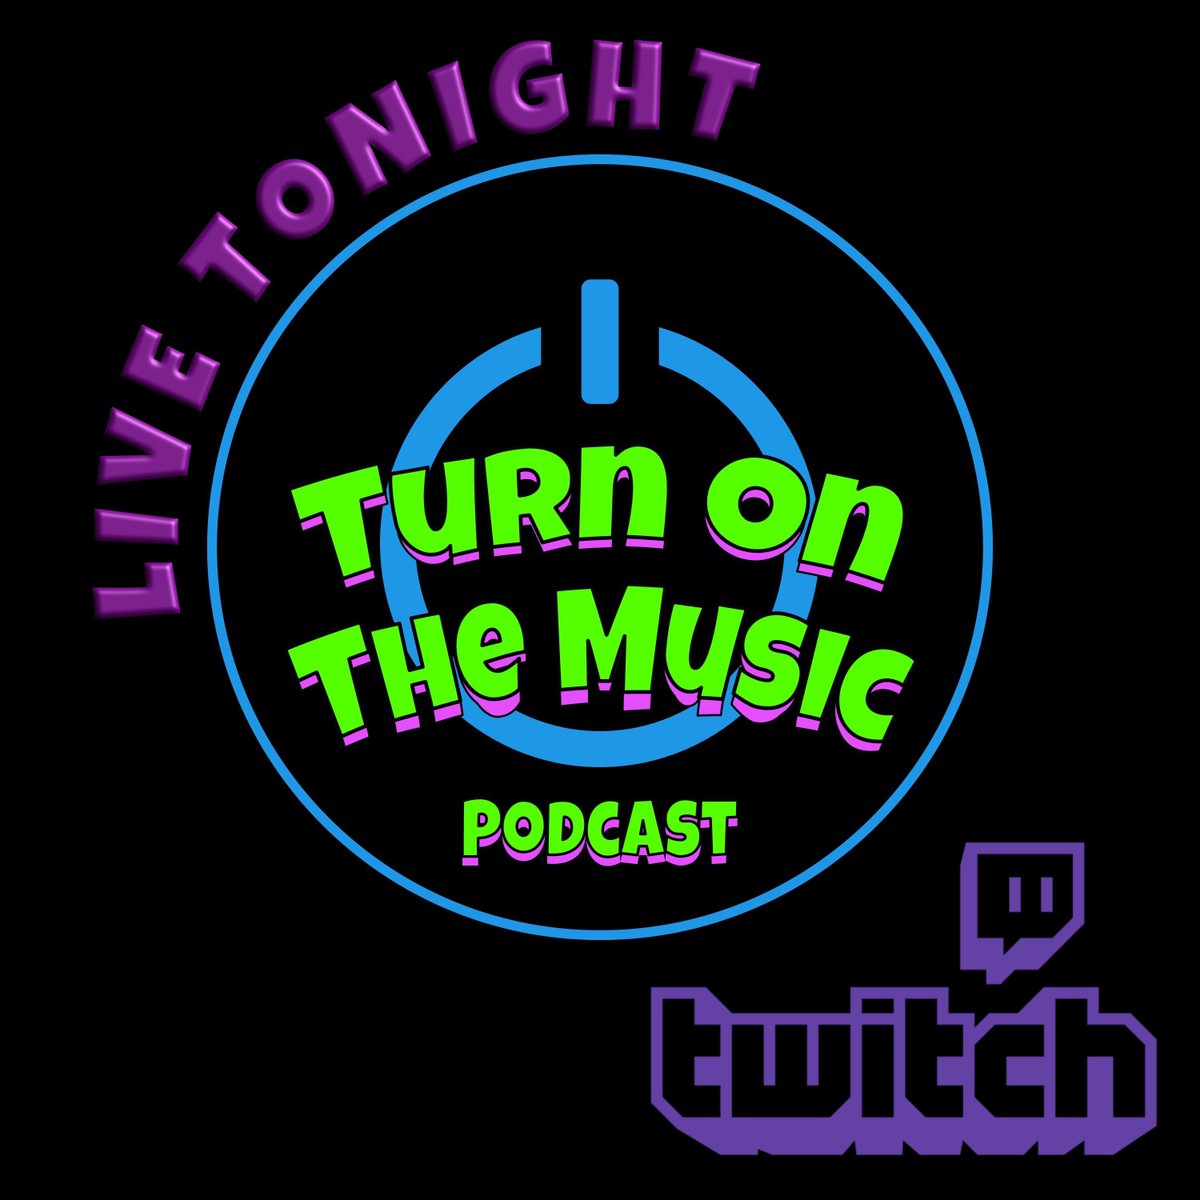 TONIGHT! Kyle & CJ are live on Twitch @ 7:30 pm EST - Will you be joining them? We hope so! They are starting to get annoying, constantly asking the SMM to post stuff... buff.ly/3KNzGak #YouTube #sharethemusic #music #conversations #turnonthemusic #podcast